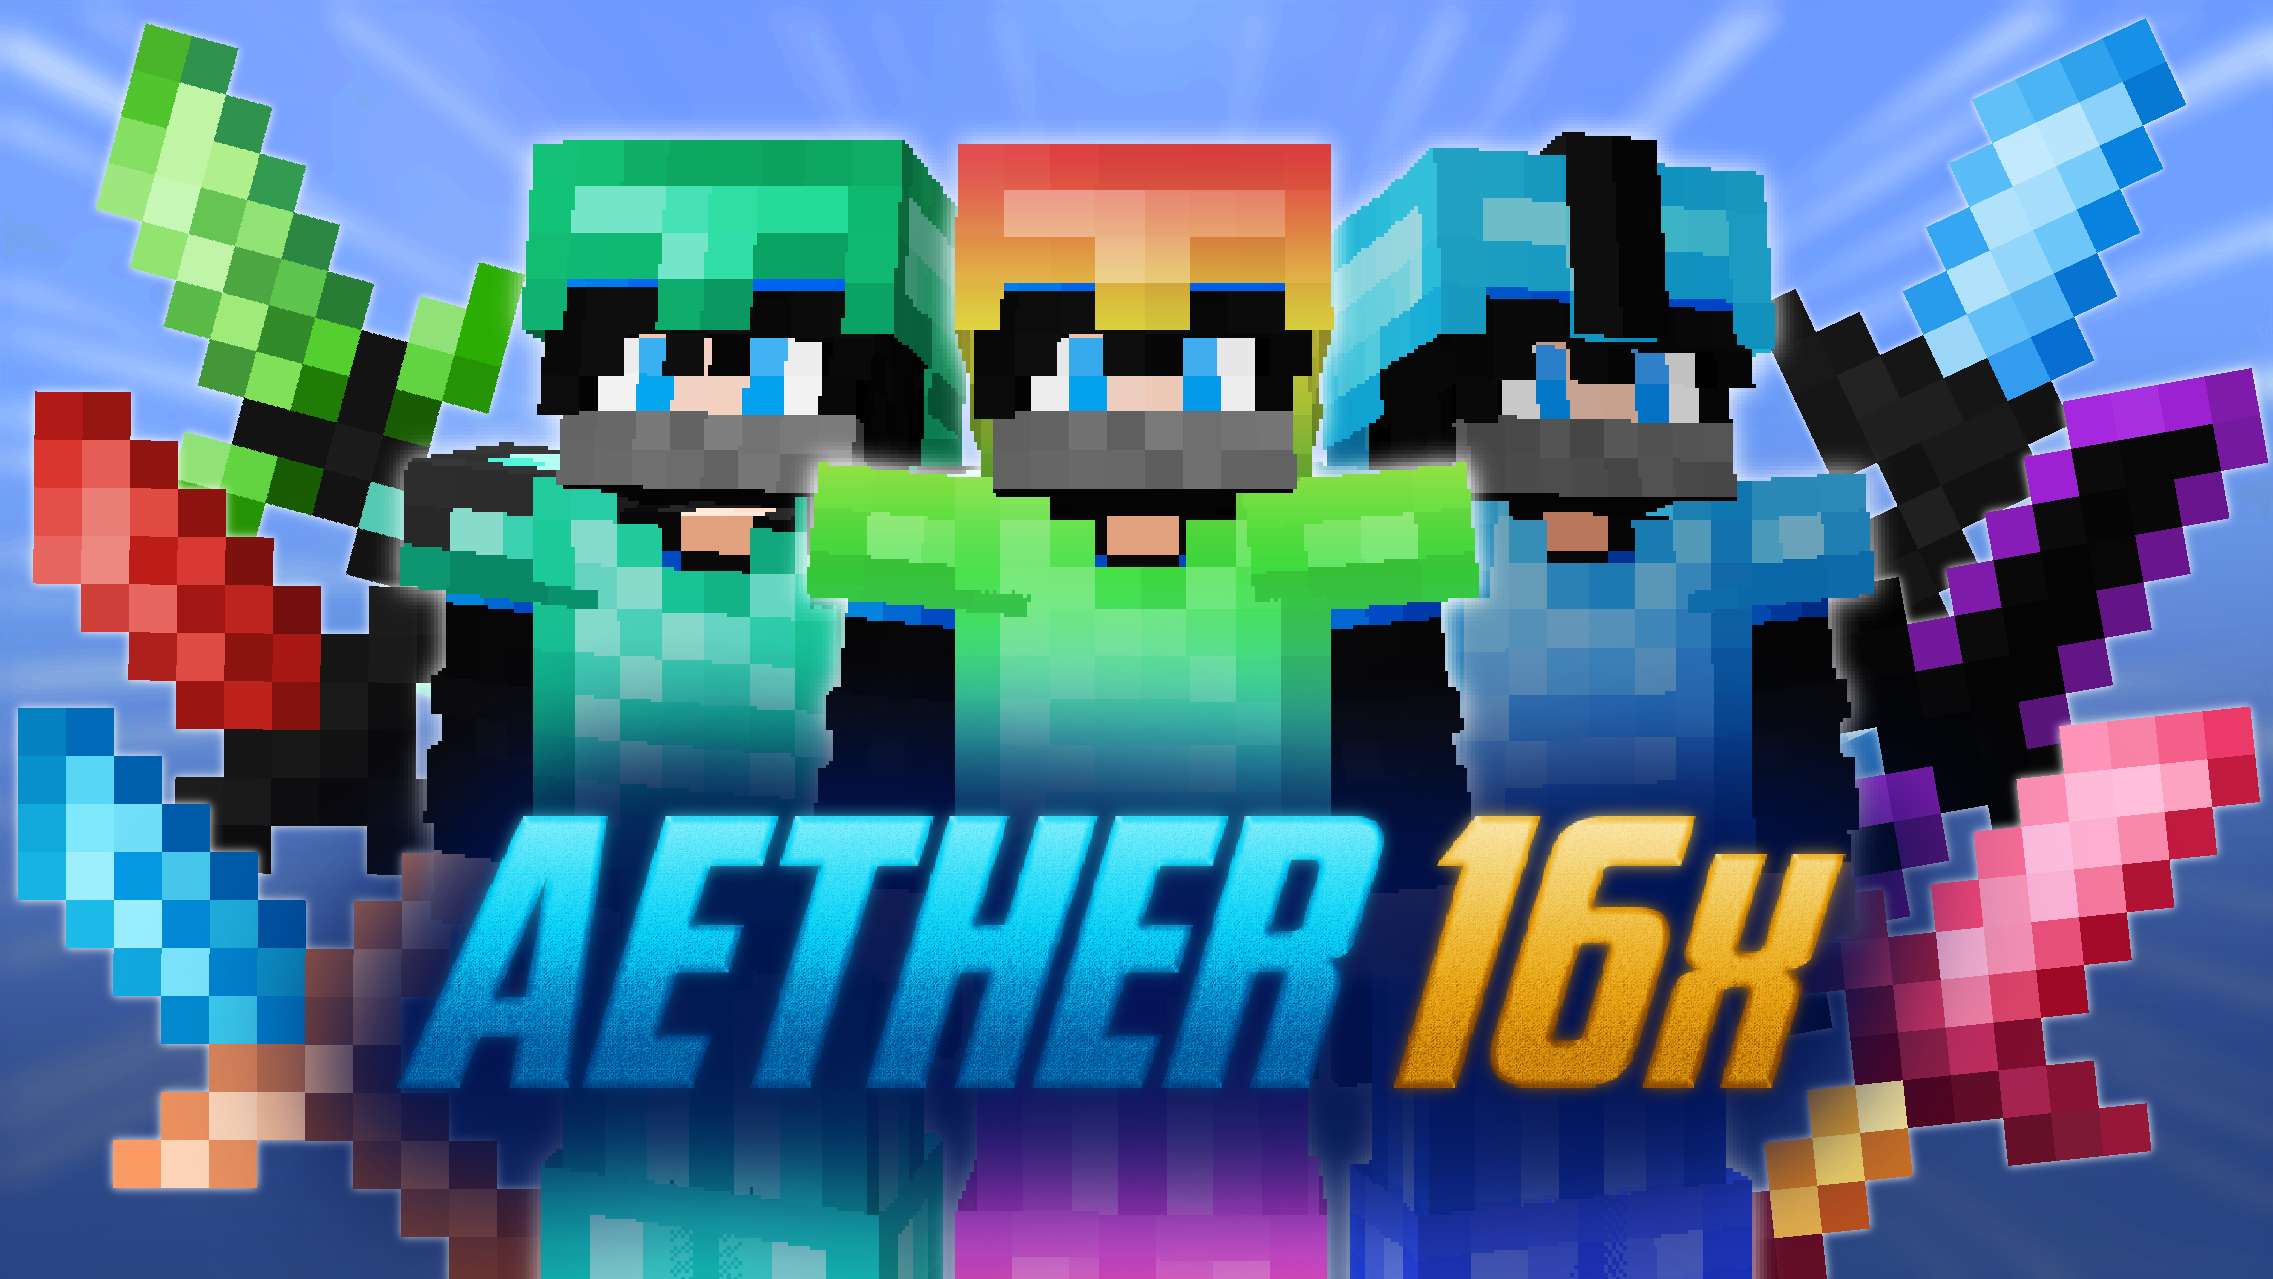 Aether 16x [NotroDan] 16 by Mqryo on PvPRP